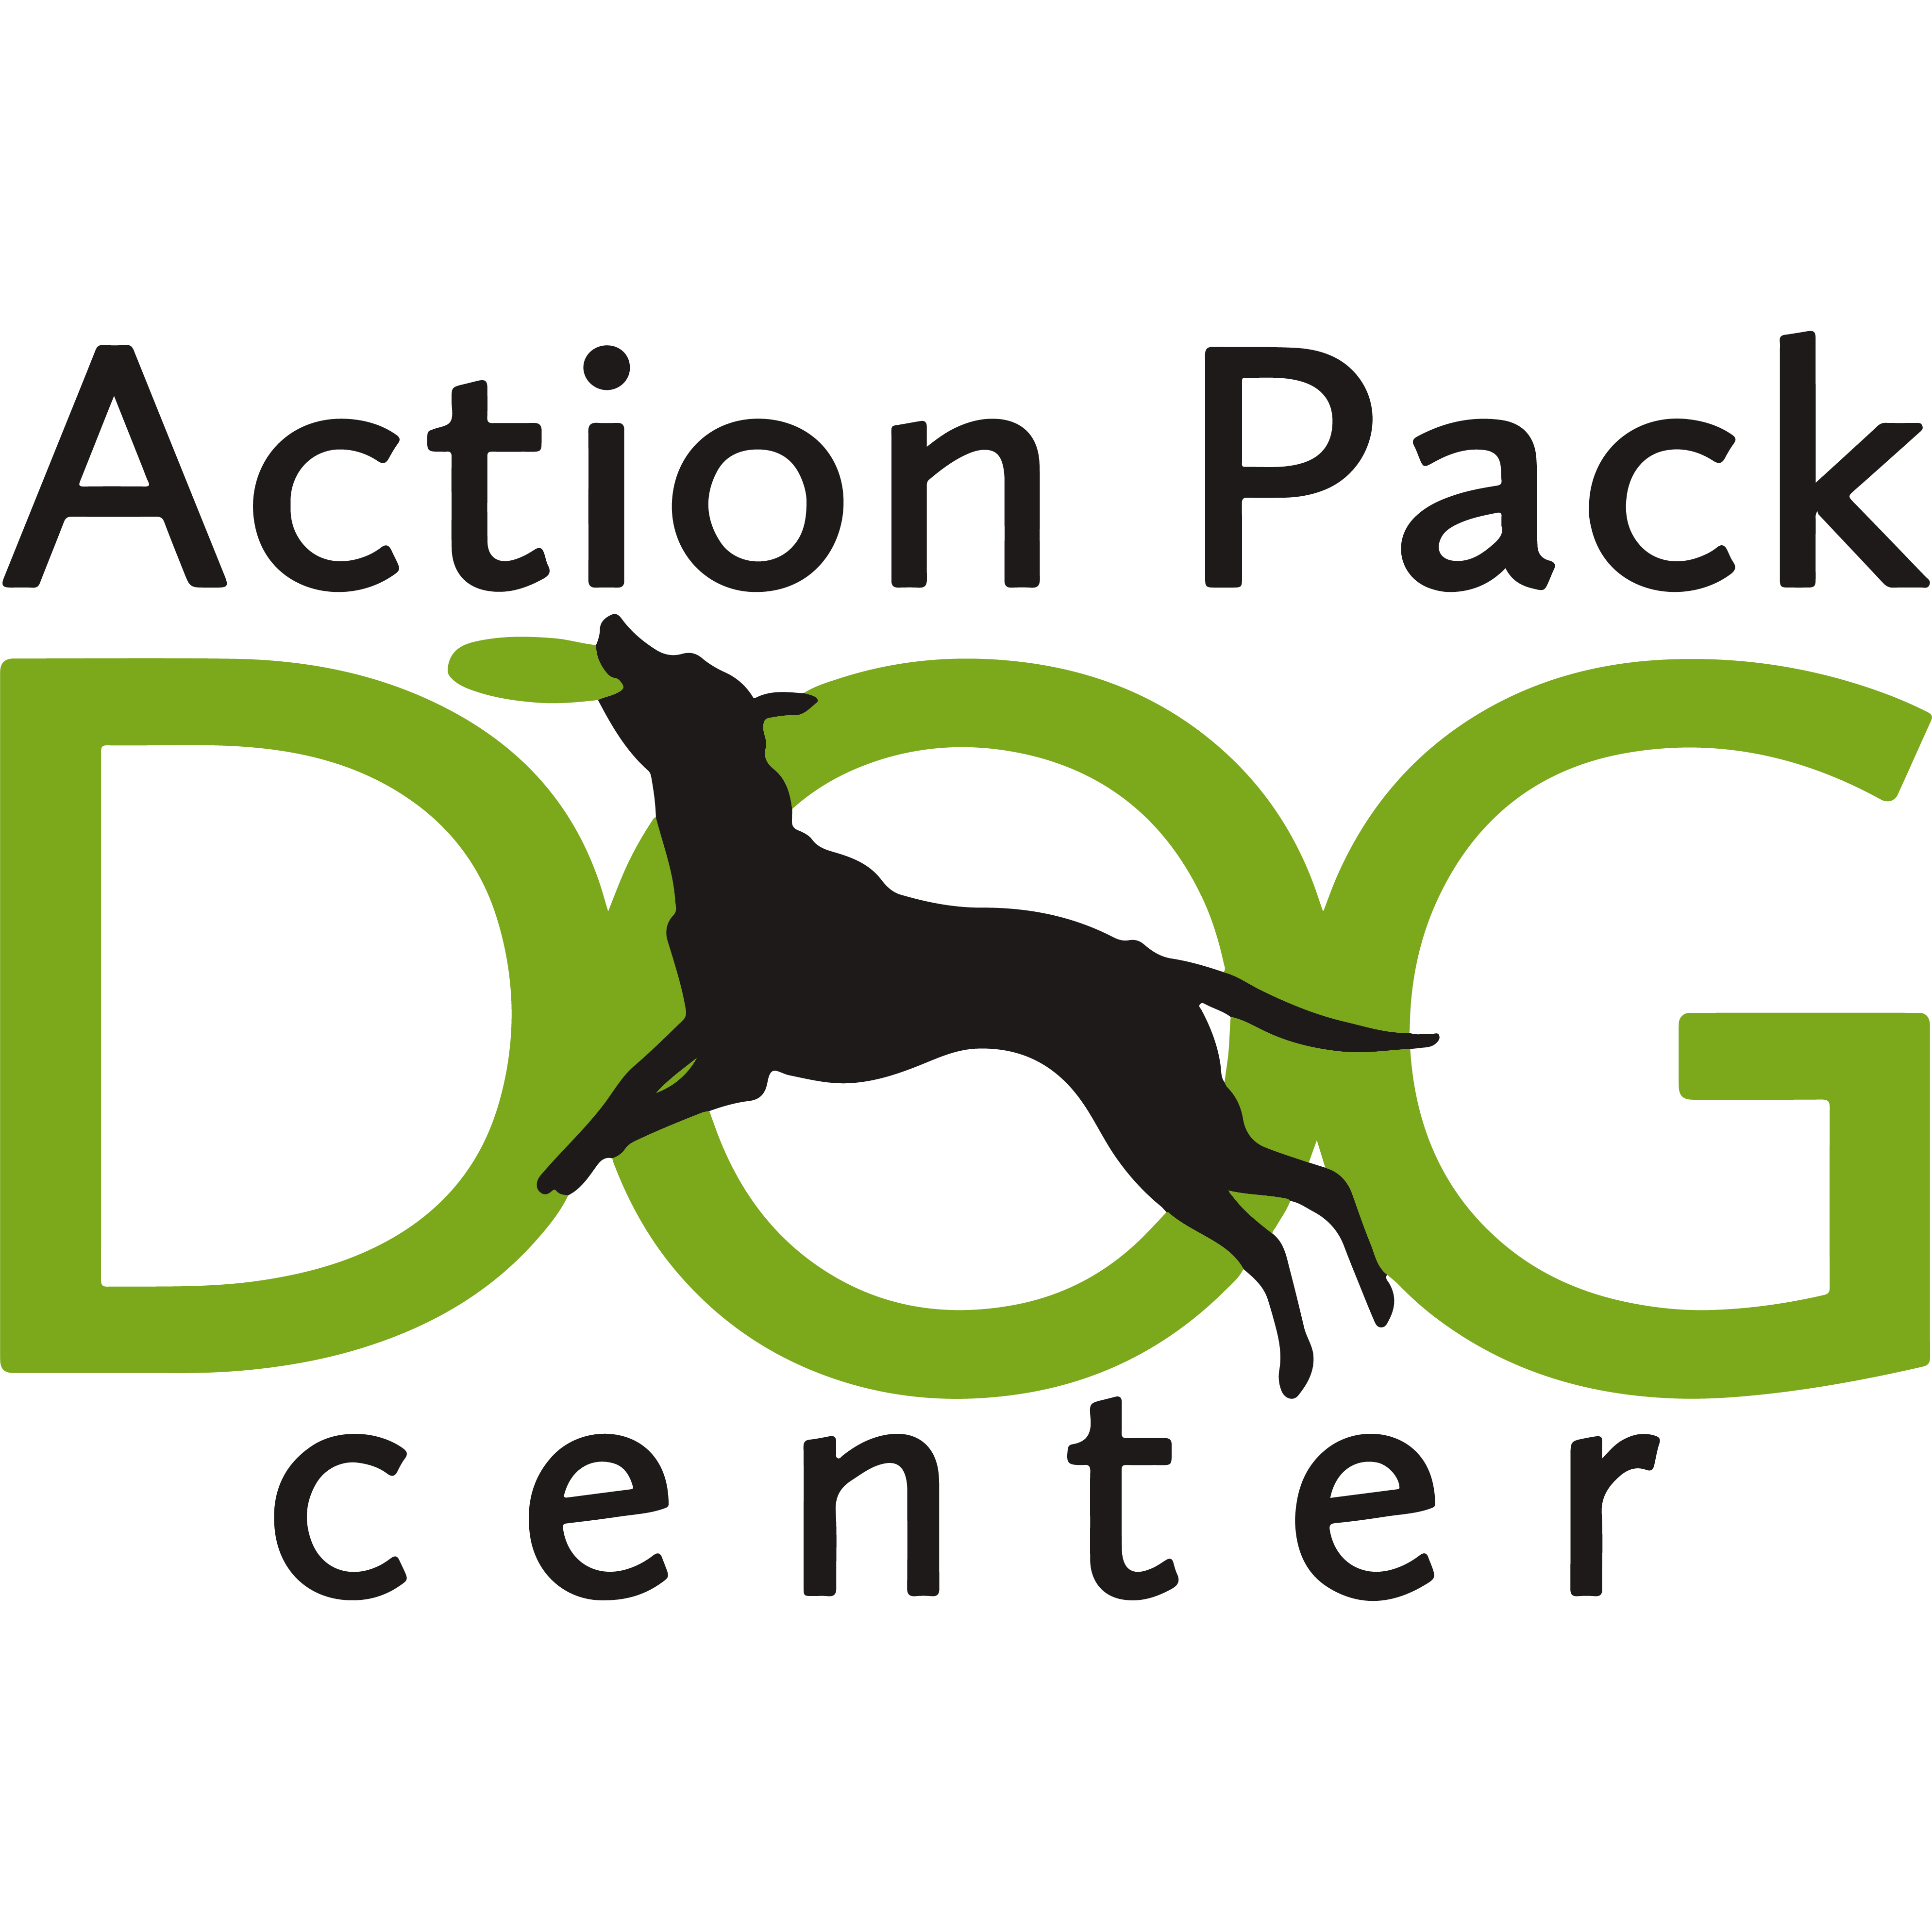 Action Pack - Georgetown - Georgetown, TX 78628 - (512)240-6080 | ShowMeLocal.com